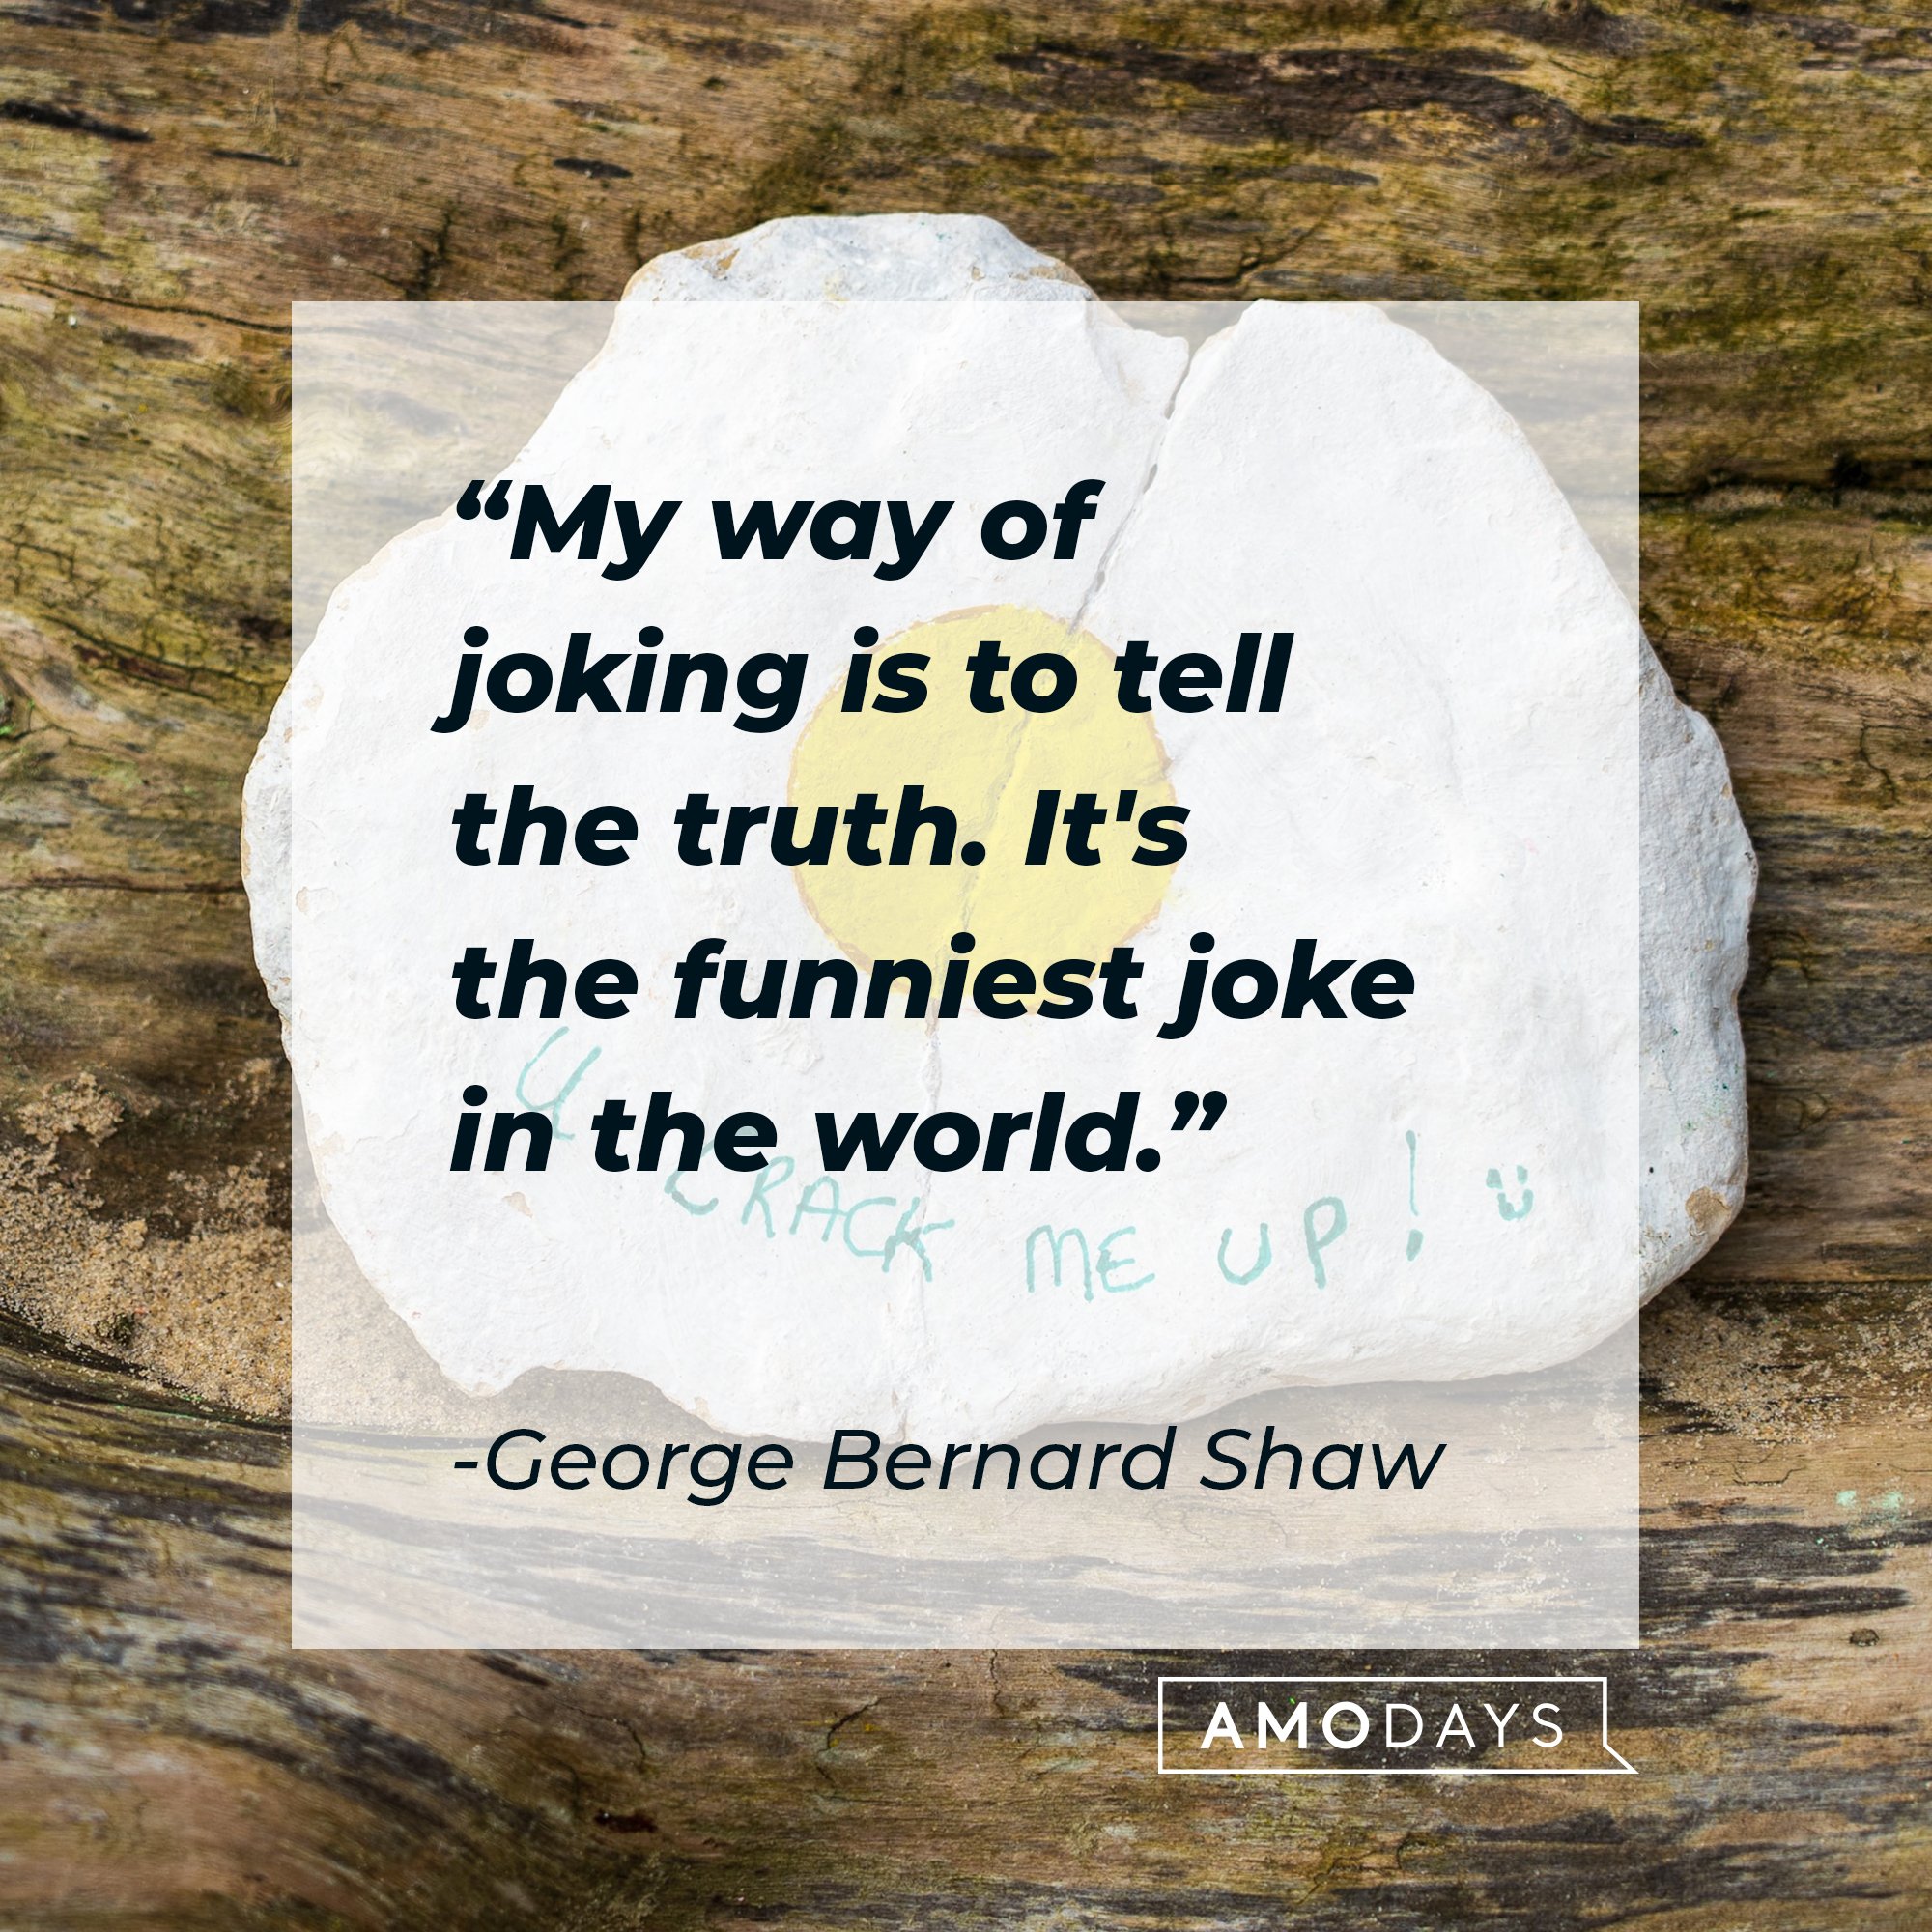 George Bernard Shaw’s quote: "My way of joking is, to tell the truth. It's the funniest joke in the world." | Image: AmoDays